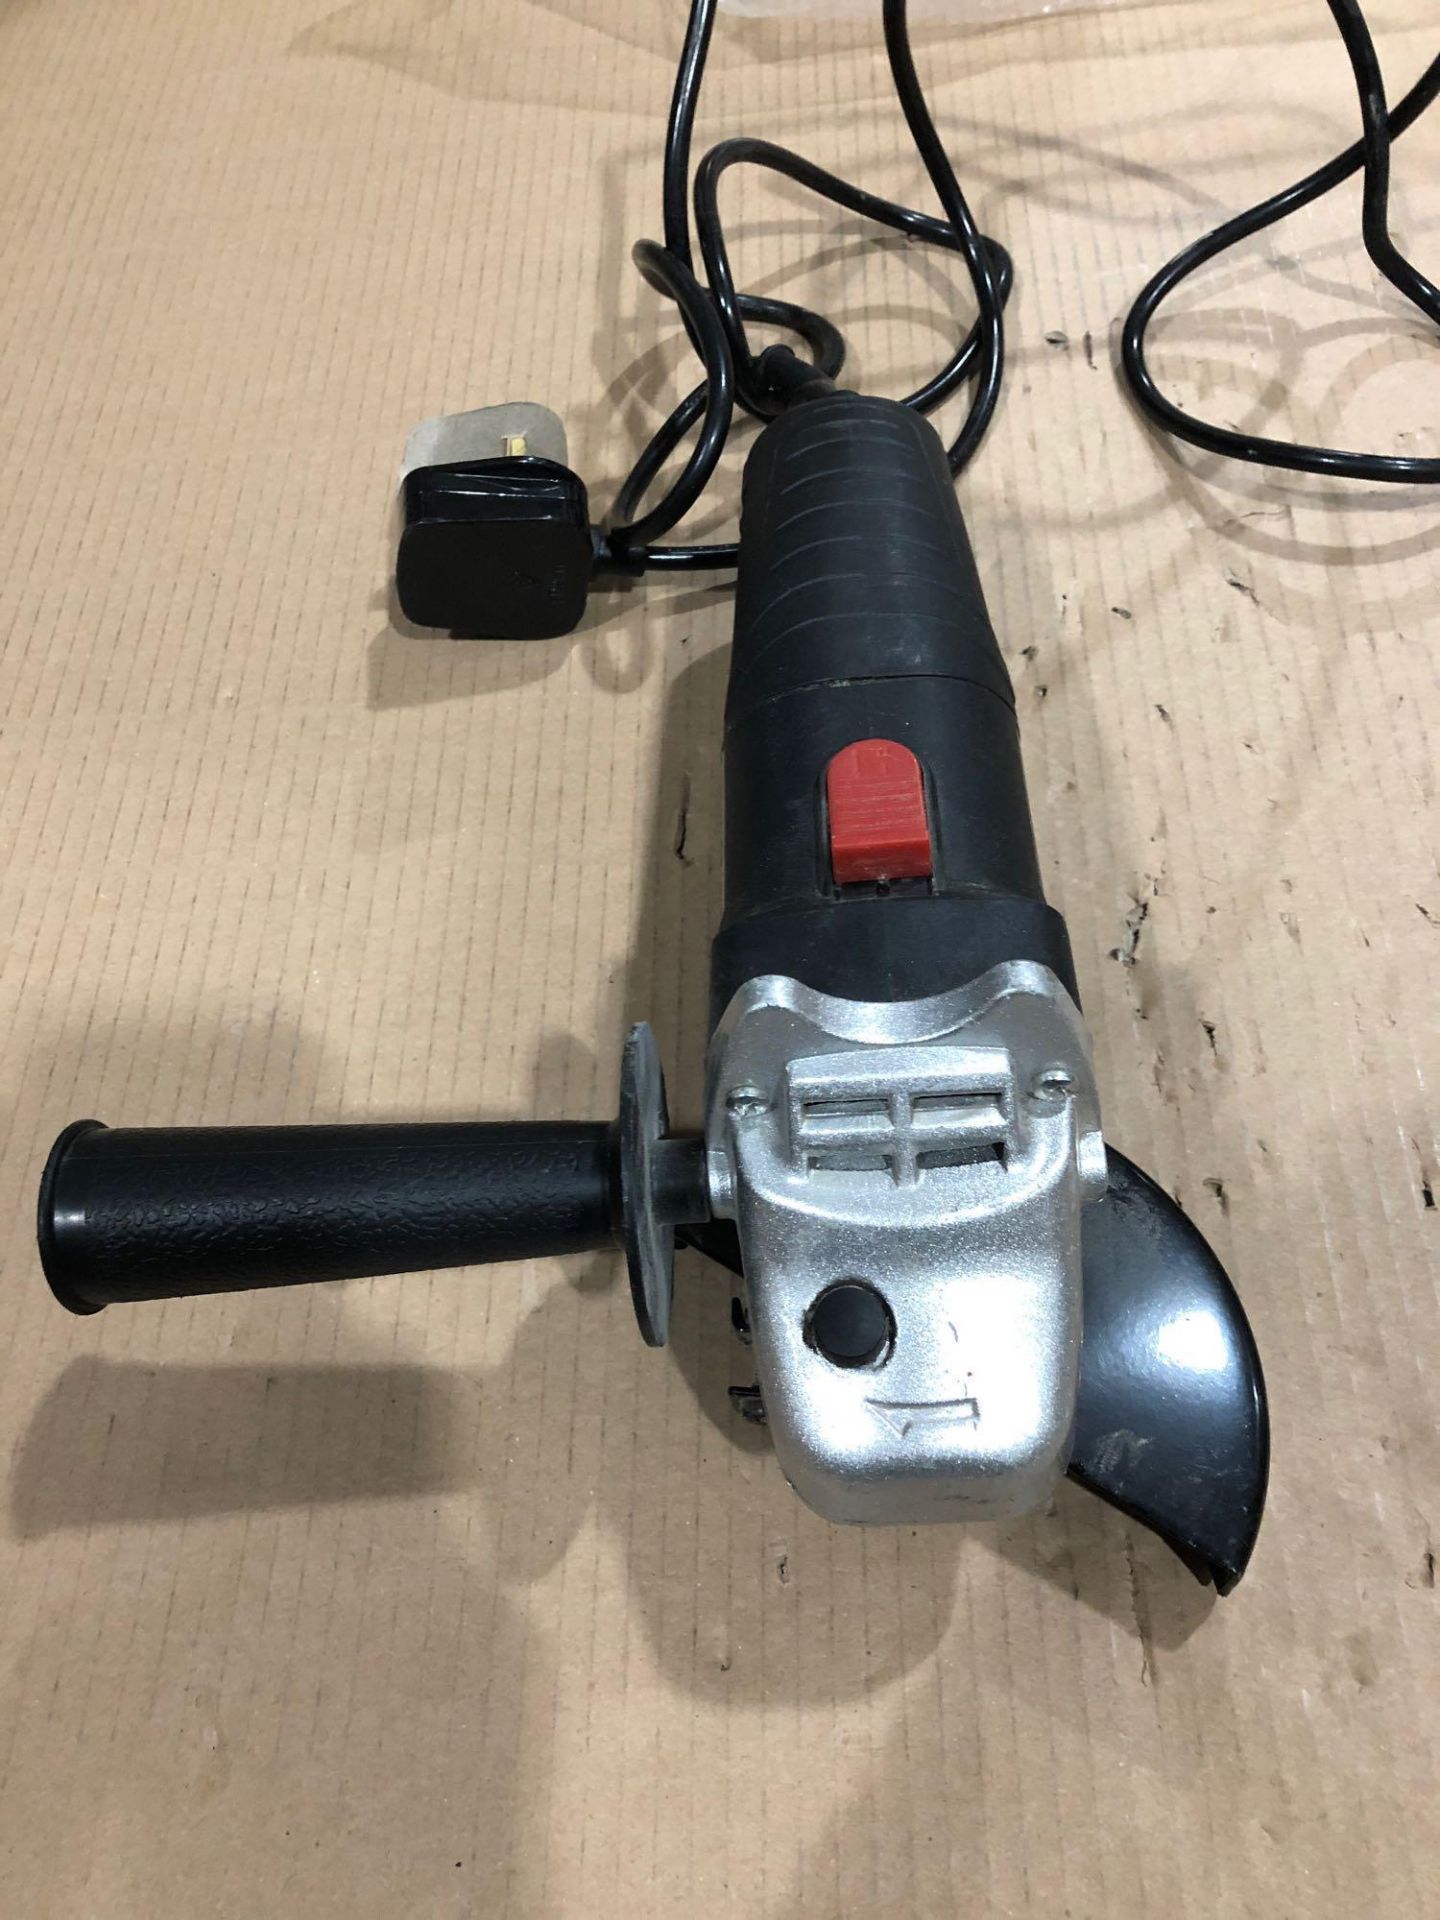 Simple Value 115mm Auxiliary Handle Corded Angle Grinder - Image 2 of 5